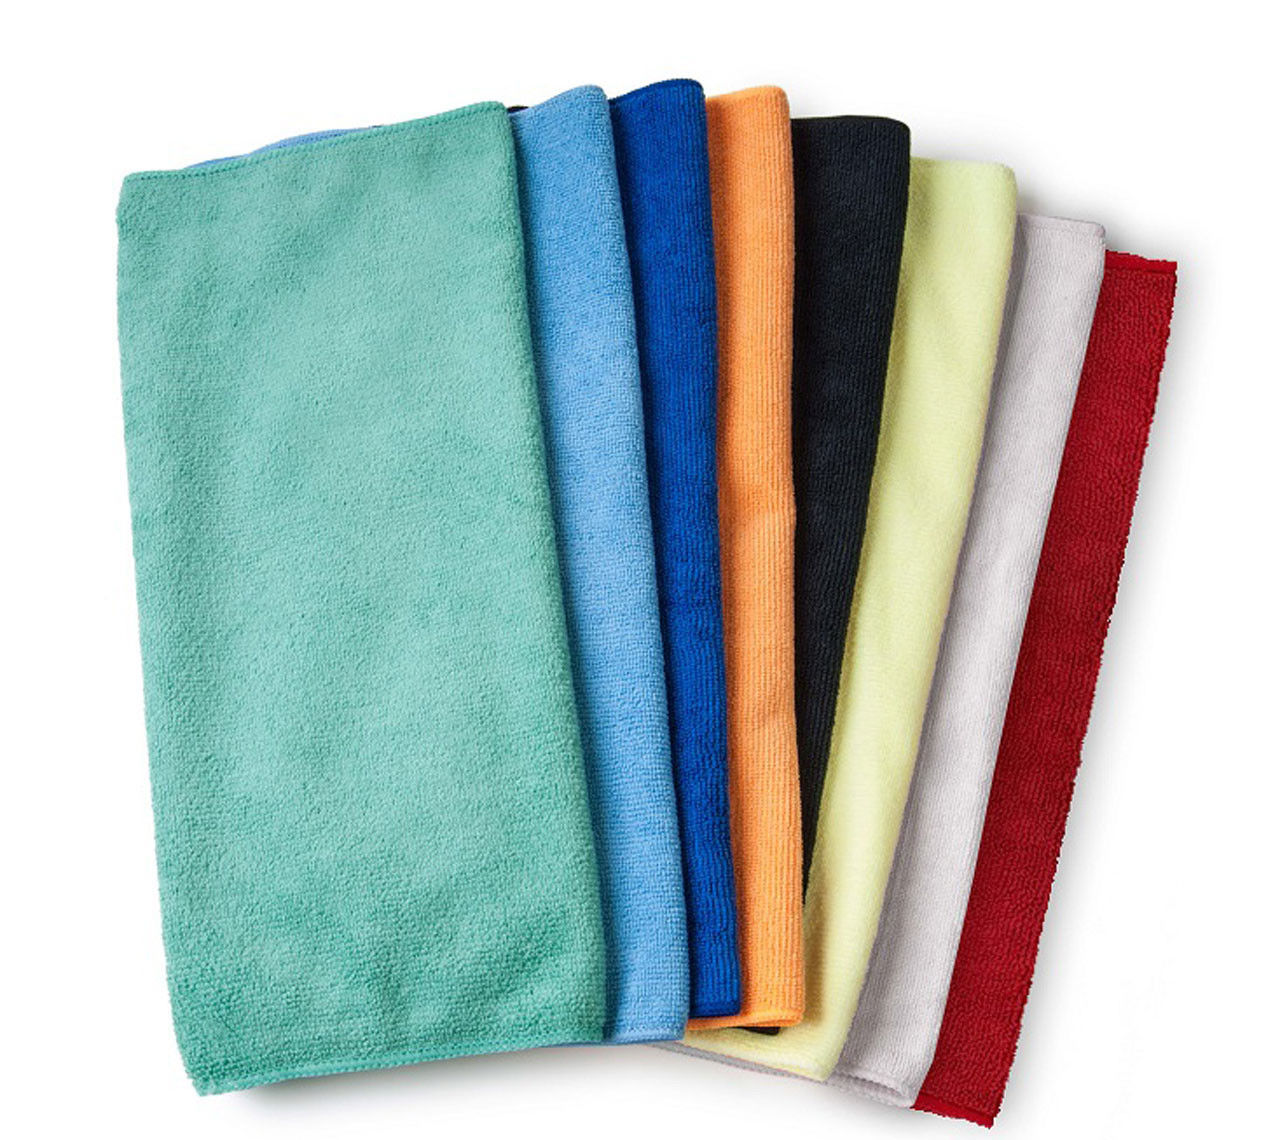 How many bulk golf towels are included in a case?